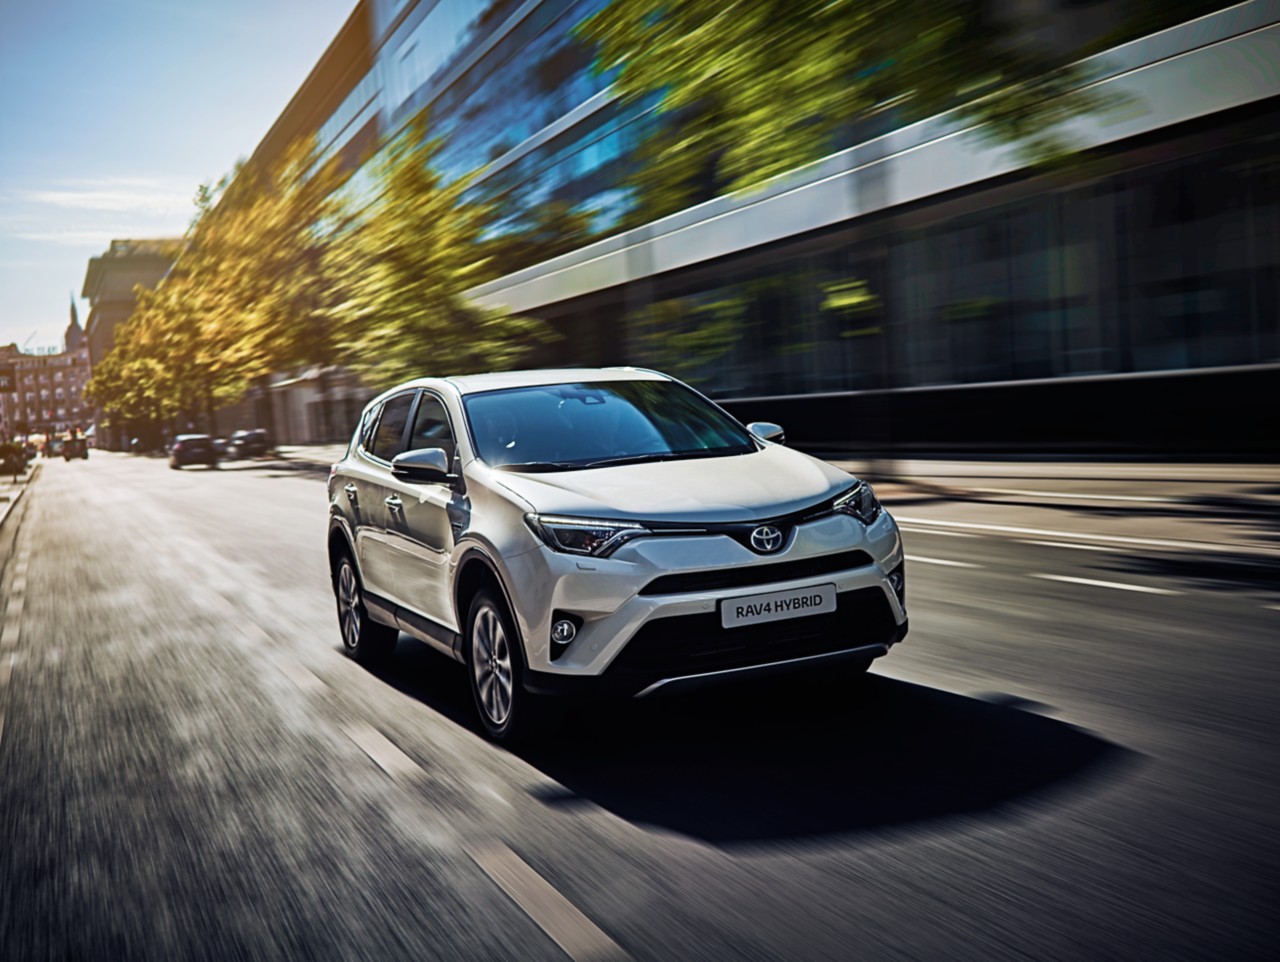 What are our eco-driving tips for hybrid drivers?